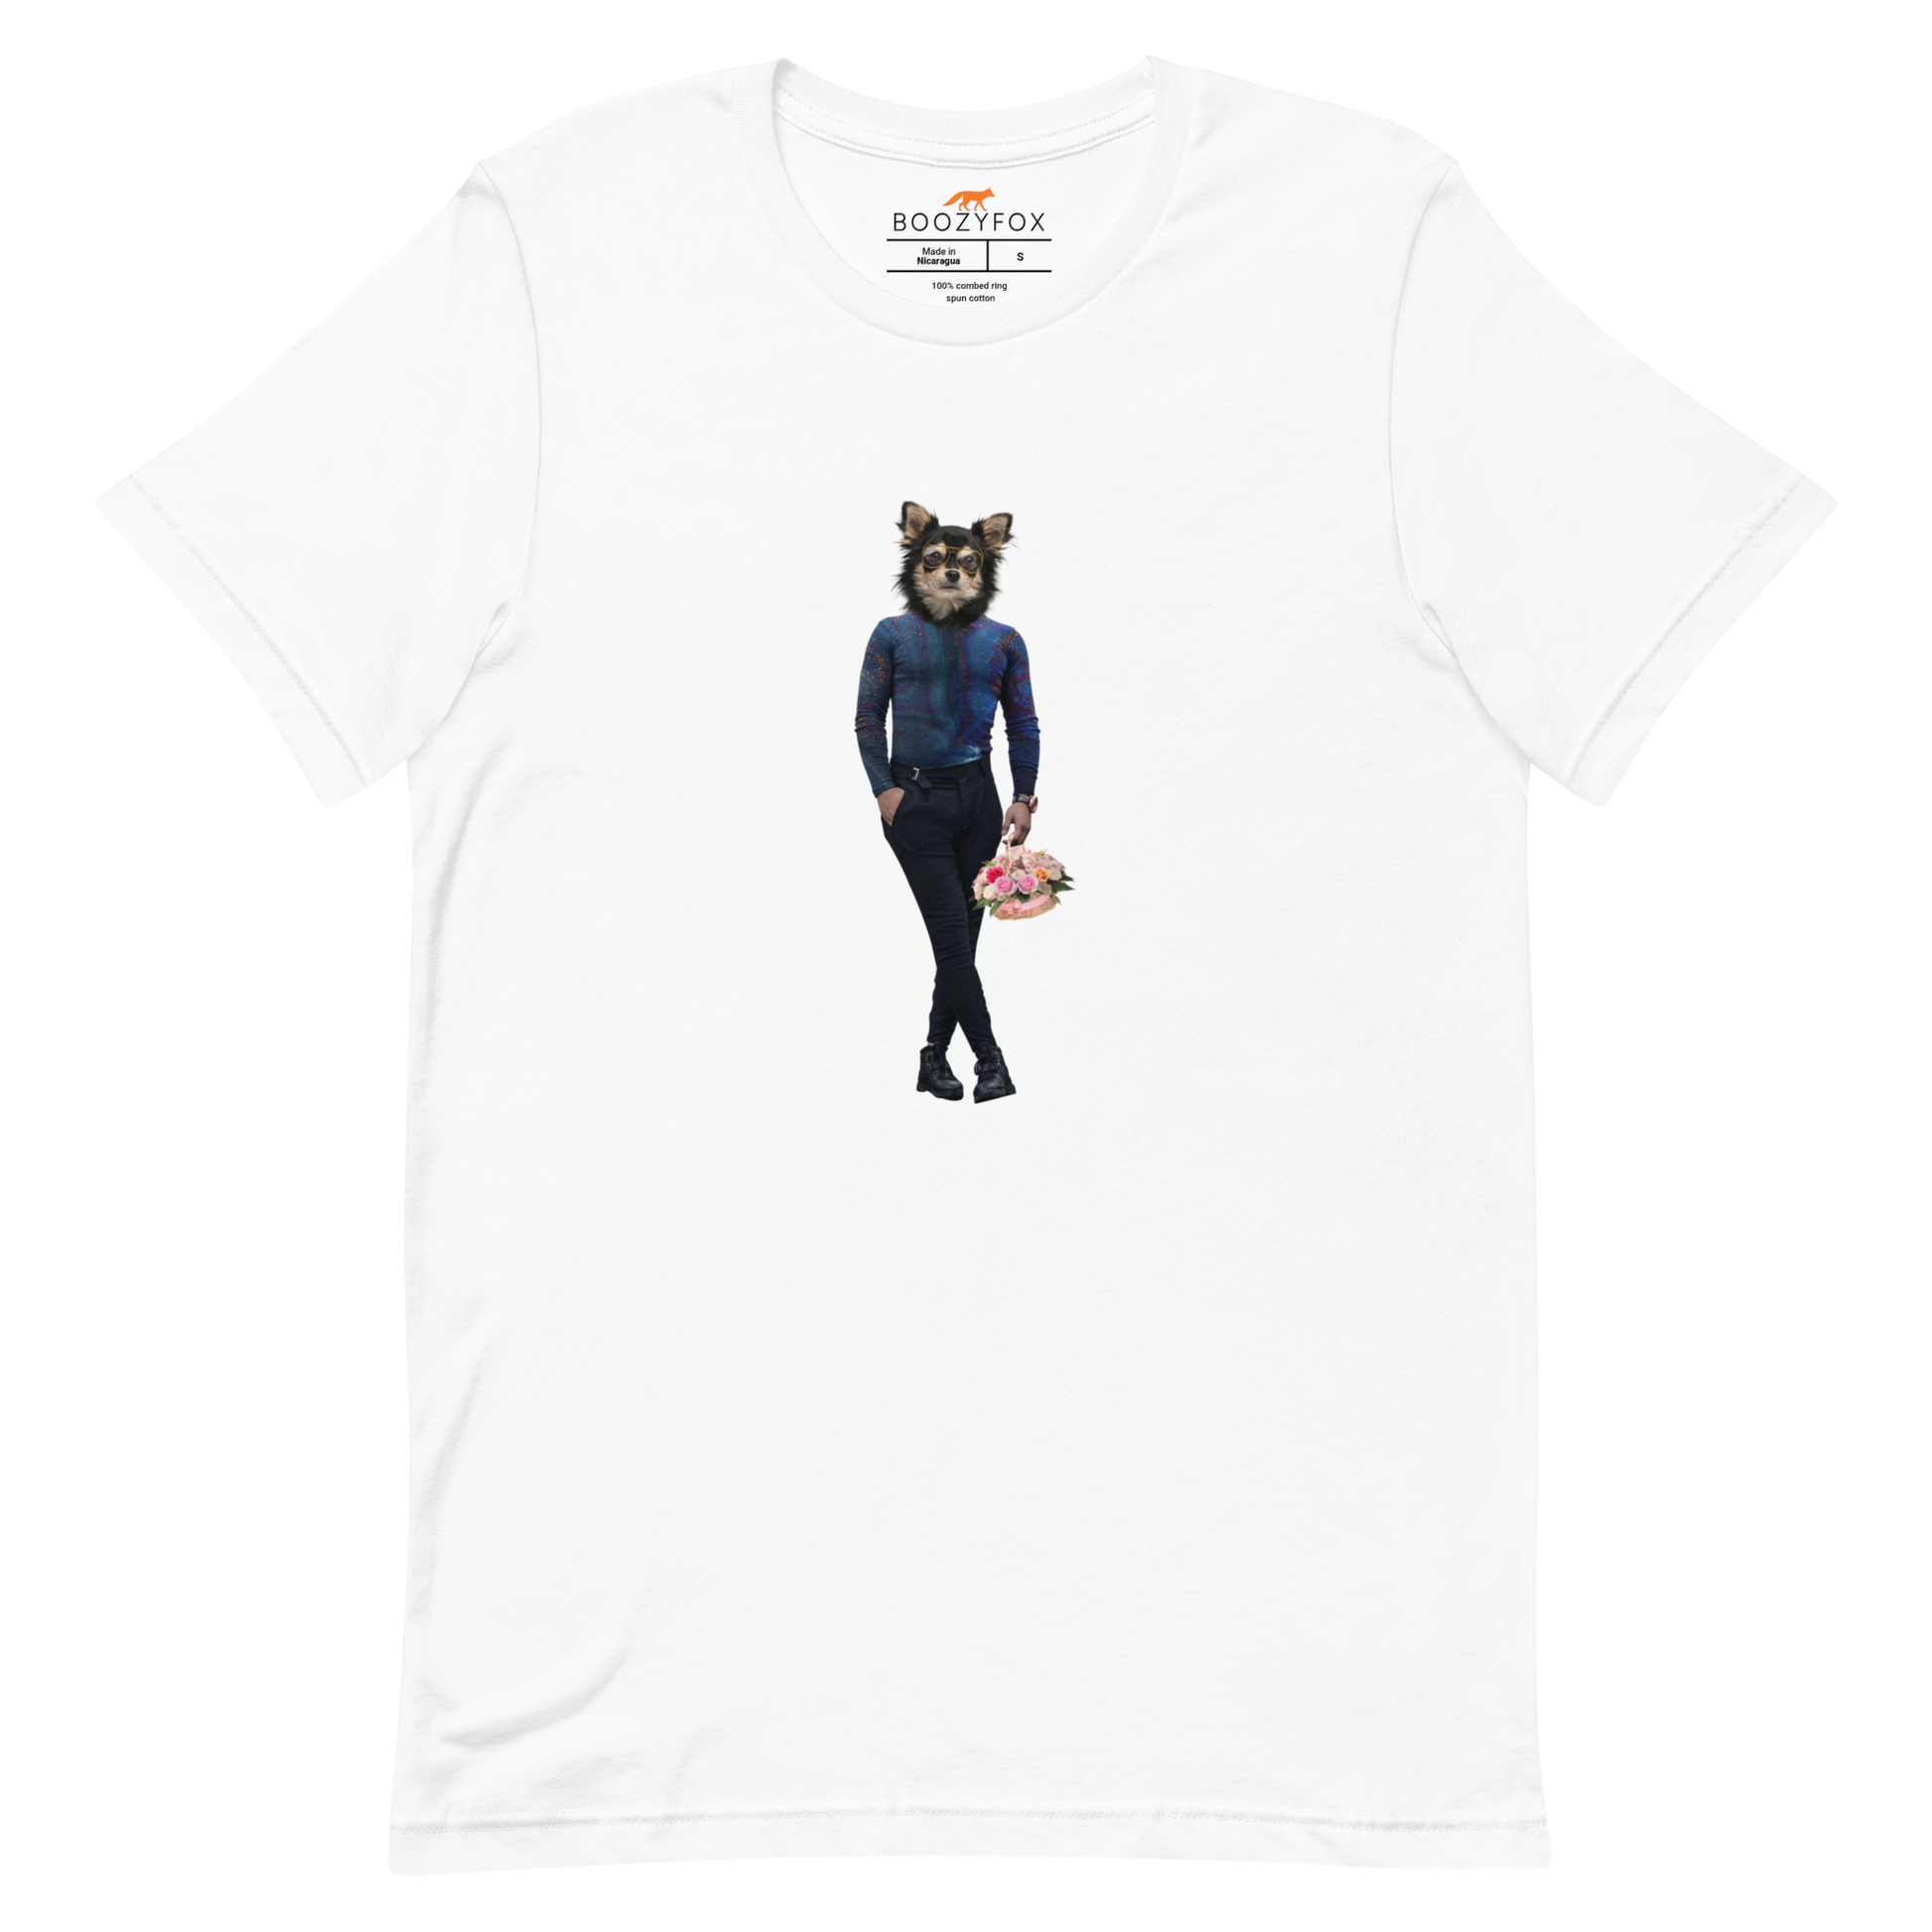 White Premium Dog T-Shirt featuring an Anthropomorphic Dog graphic on the chest - Funny Graphic Dog Tees - Boozy Fox